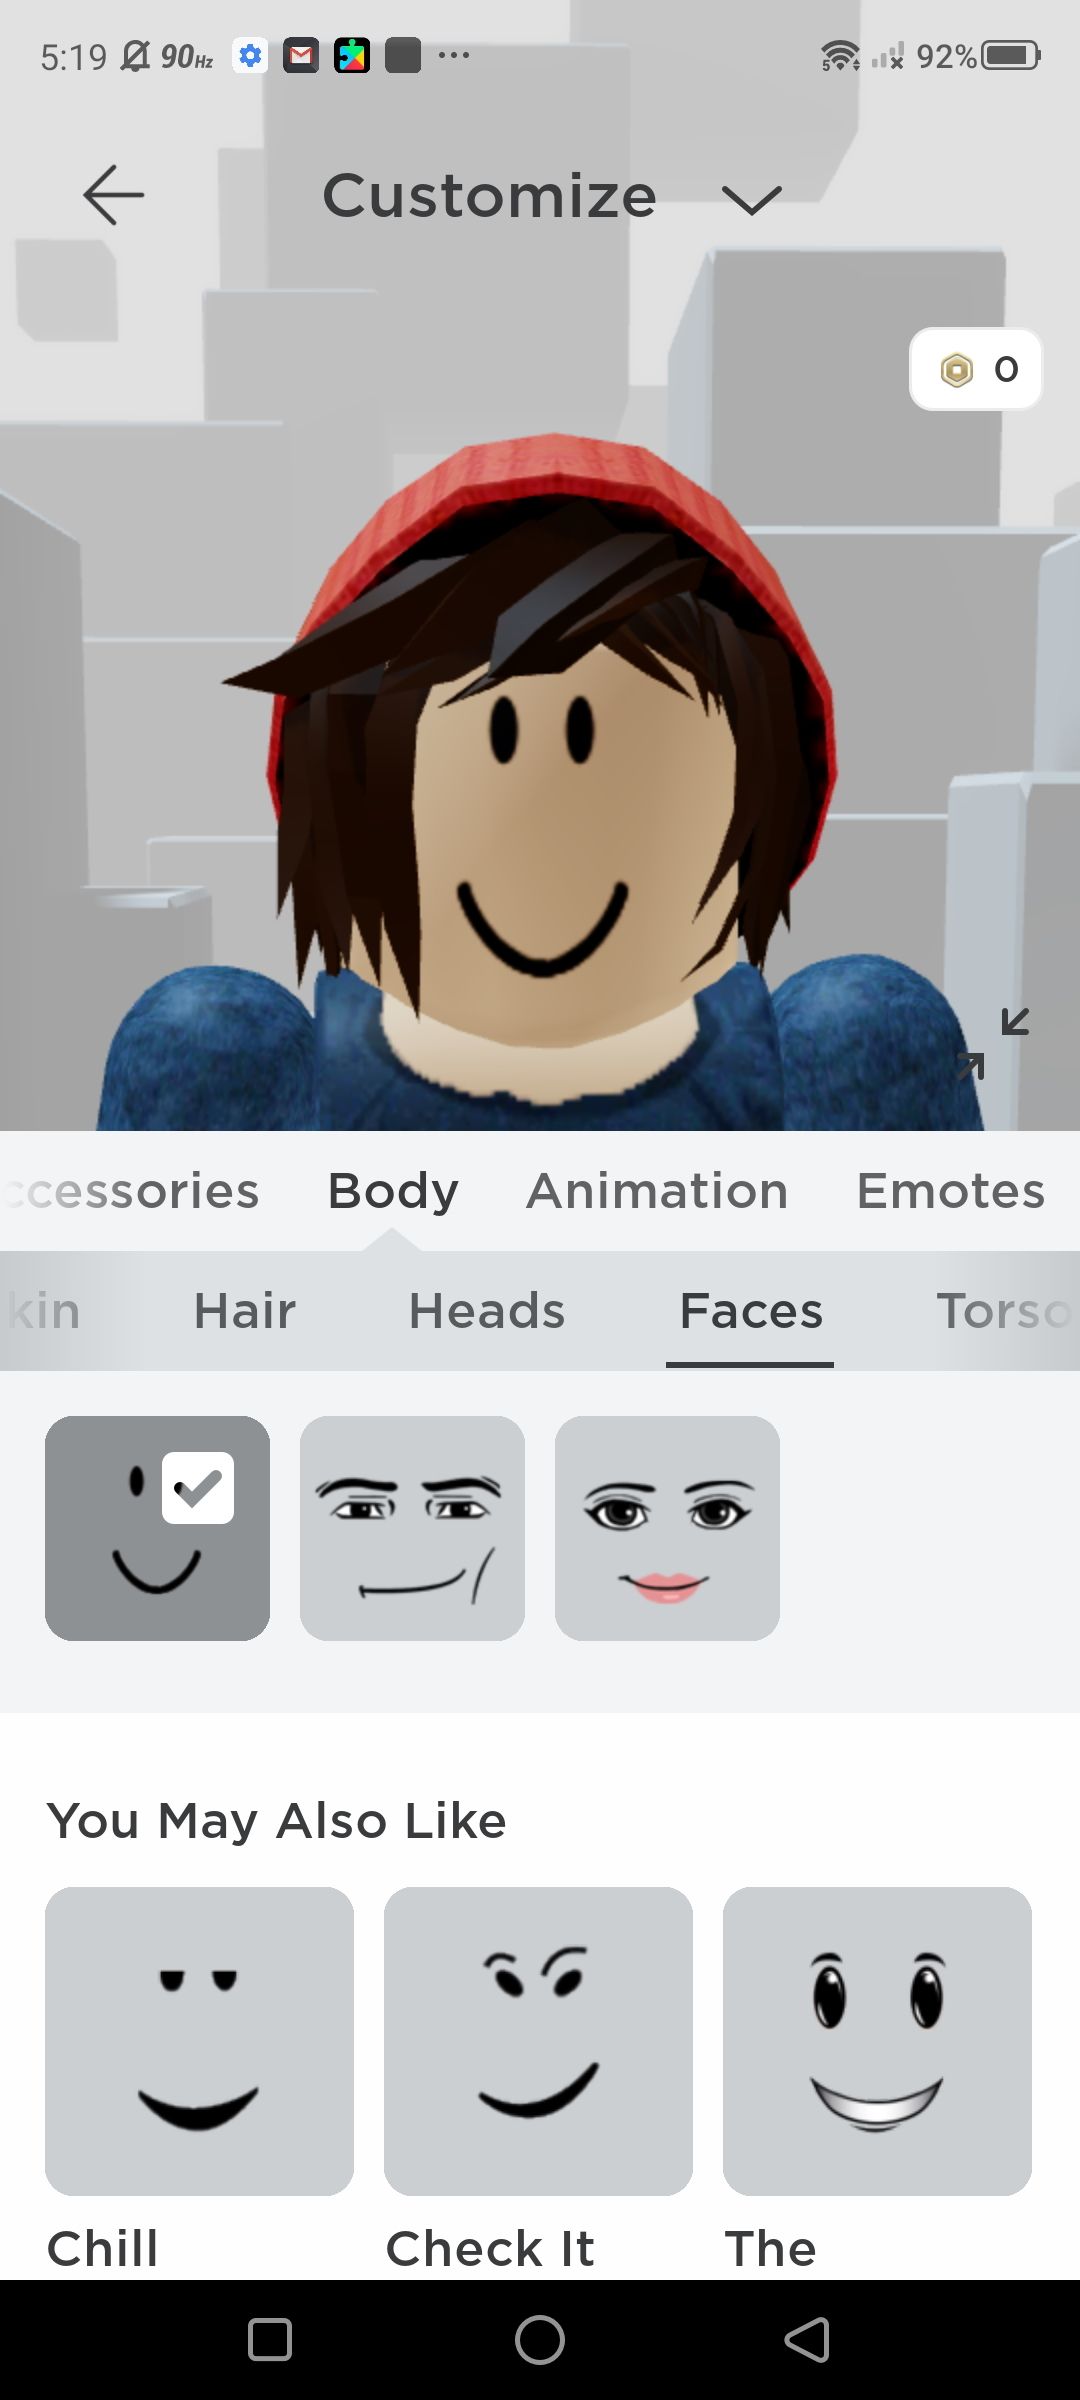 roblox selected smile face for custom avatar